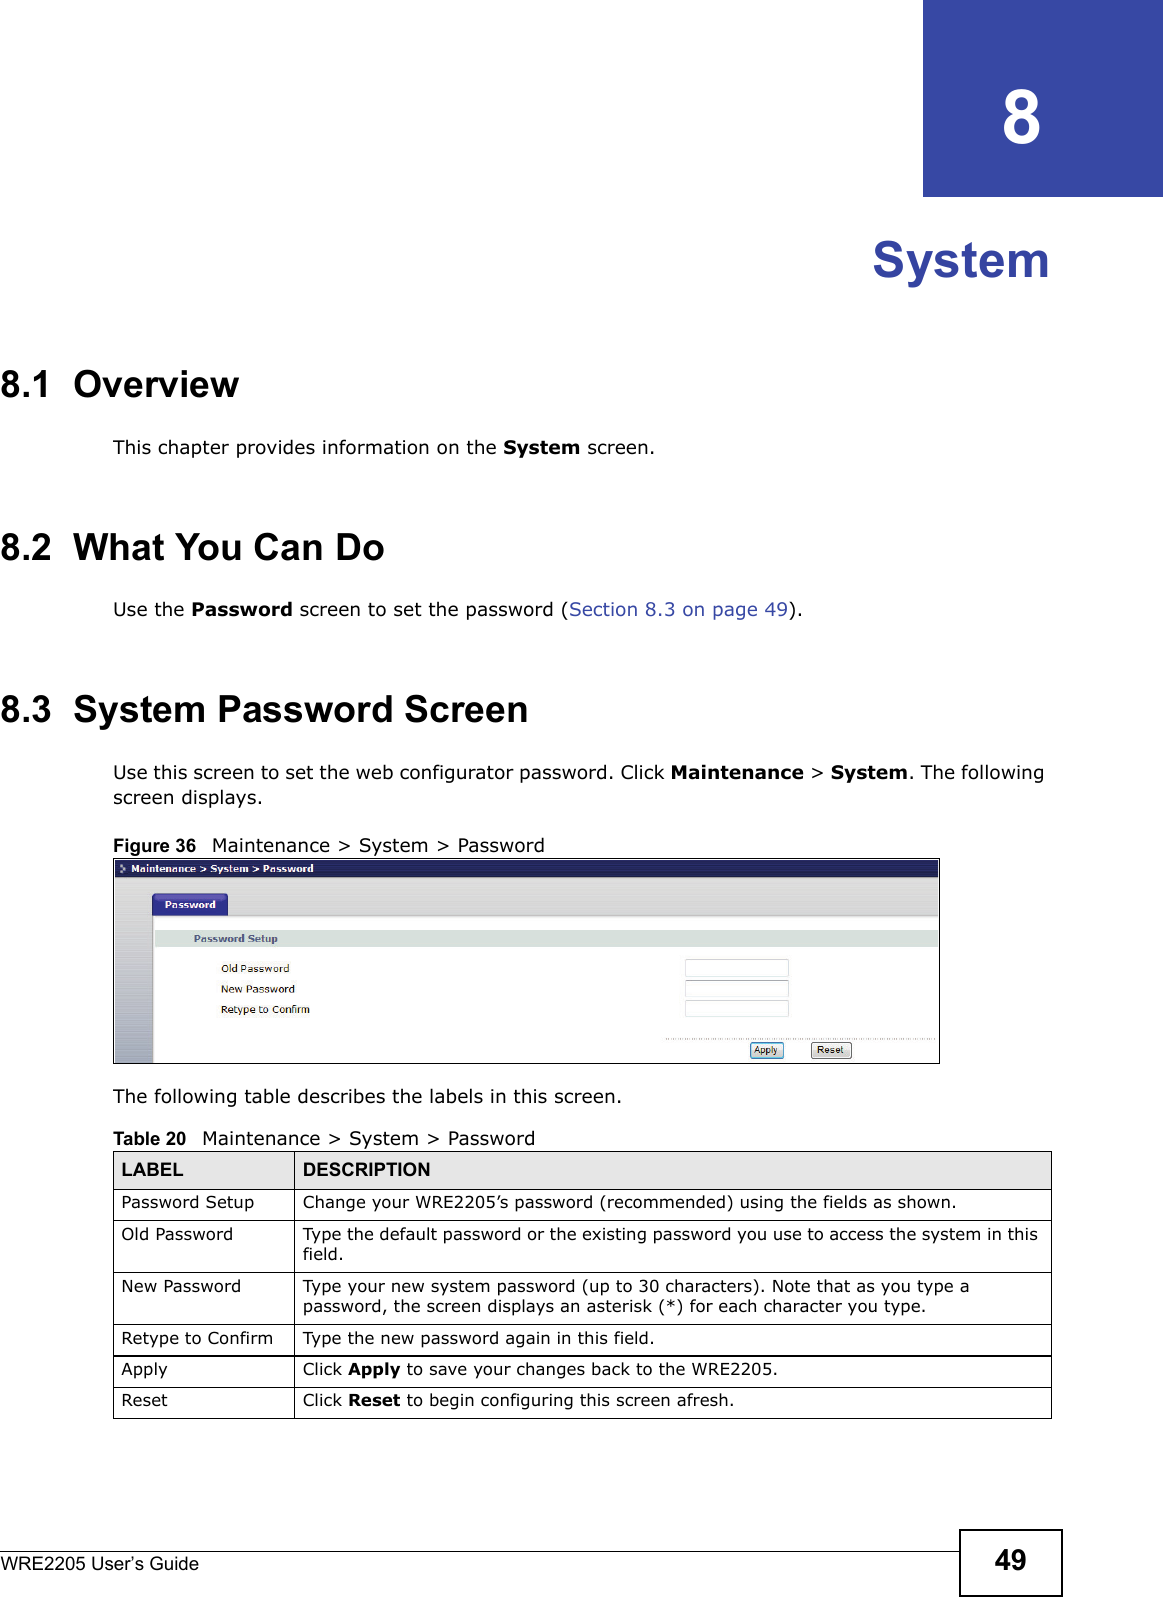 WRE2205 User’s Guide 49CHAPTER   8System8.1  OverviewThis chapter provides information on the System screen. 8.2  What You Can DoUse the Password screen to set the password (Section 8.3 on page 49).8.3  System Password Screen Use this screen to set the web configurator password. Click Maintenance &gt; System. The following screen displays.Figure 36   Maintenance &gt; System &gt; Password The following table describes the labels in this screen.Table 20   Maintenance &gt; System &gt; PasswordLABEL DESCRIPTIONPassword Setup Change your WRE2205’s password (recommended) using the fields as shown.Old Password Type the default password or the existing password you use to access the system in this field.New Password Type your new system password (up to 30 characters). Note that as you type a password, the screen displays an asterisk (*) for each character you type.Retype to Confirm Type the new password again in this field.Apply Click Apply to save your changes back to the WRE2205.Reset Click Reset to begin configuring this screen afresh.